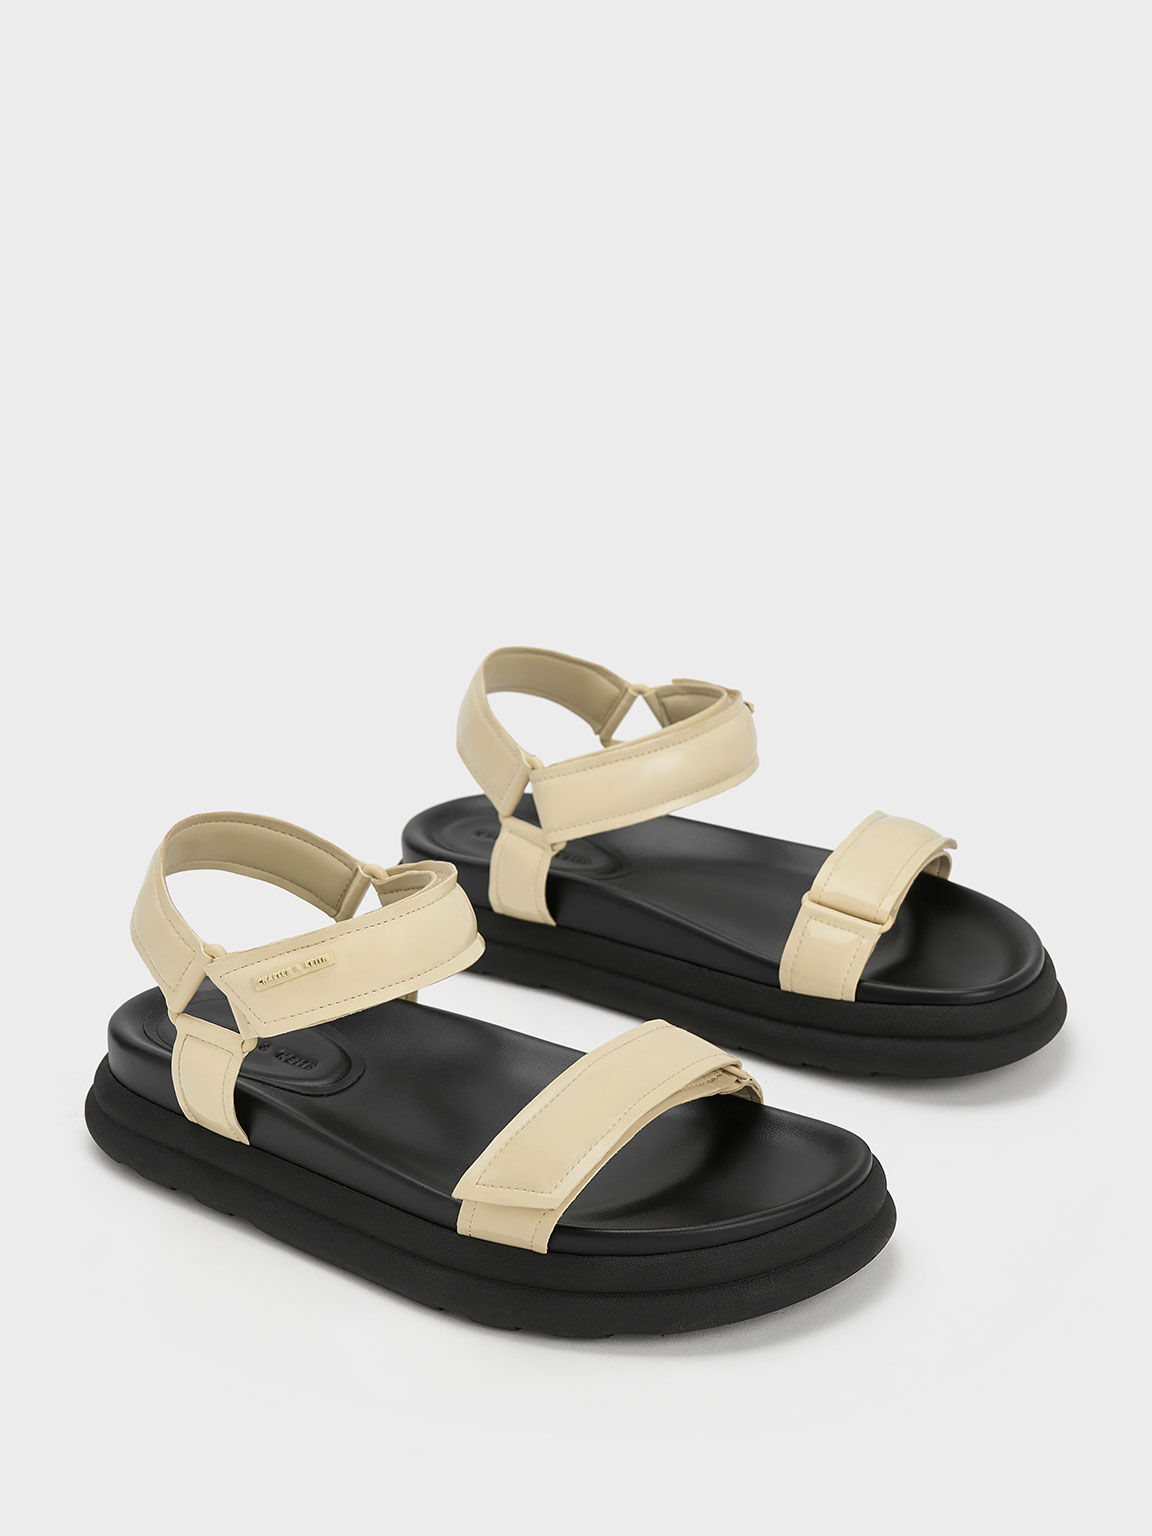 Patent Strappy Sports Sandals, Yellow, hi-res